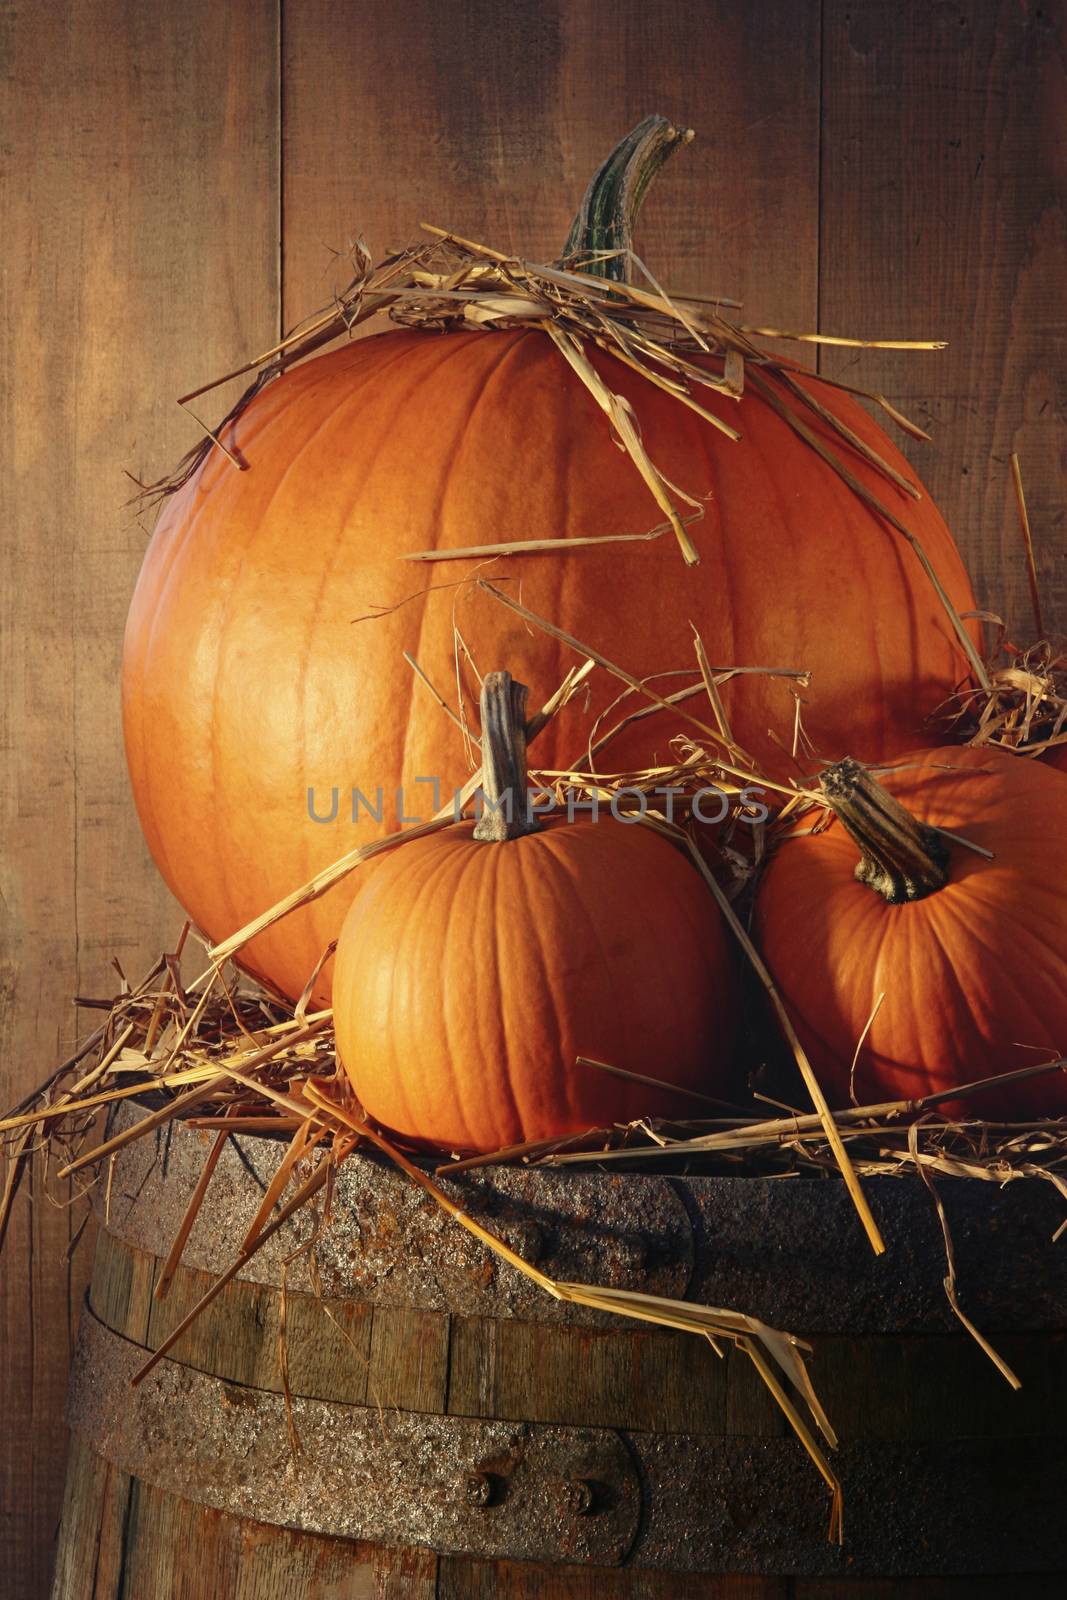 Autumn still life with pumpkins on barrel by Sandralise